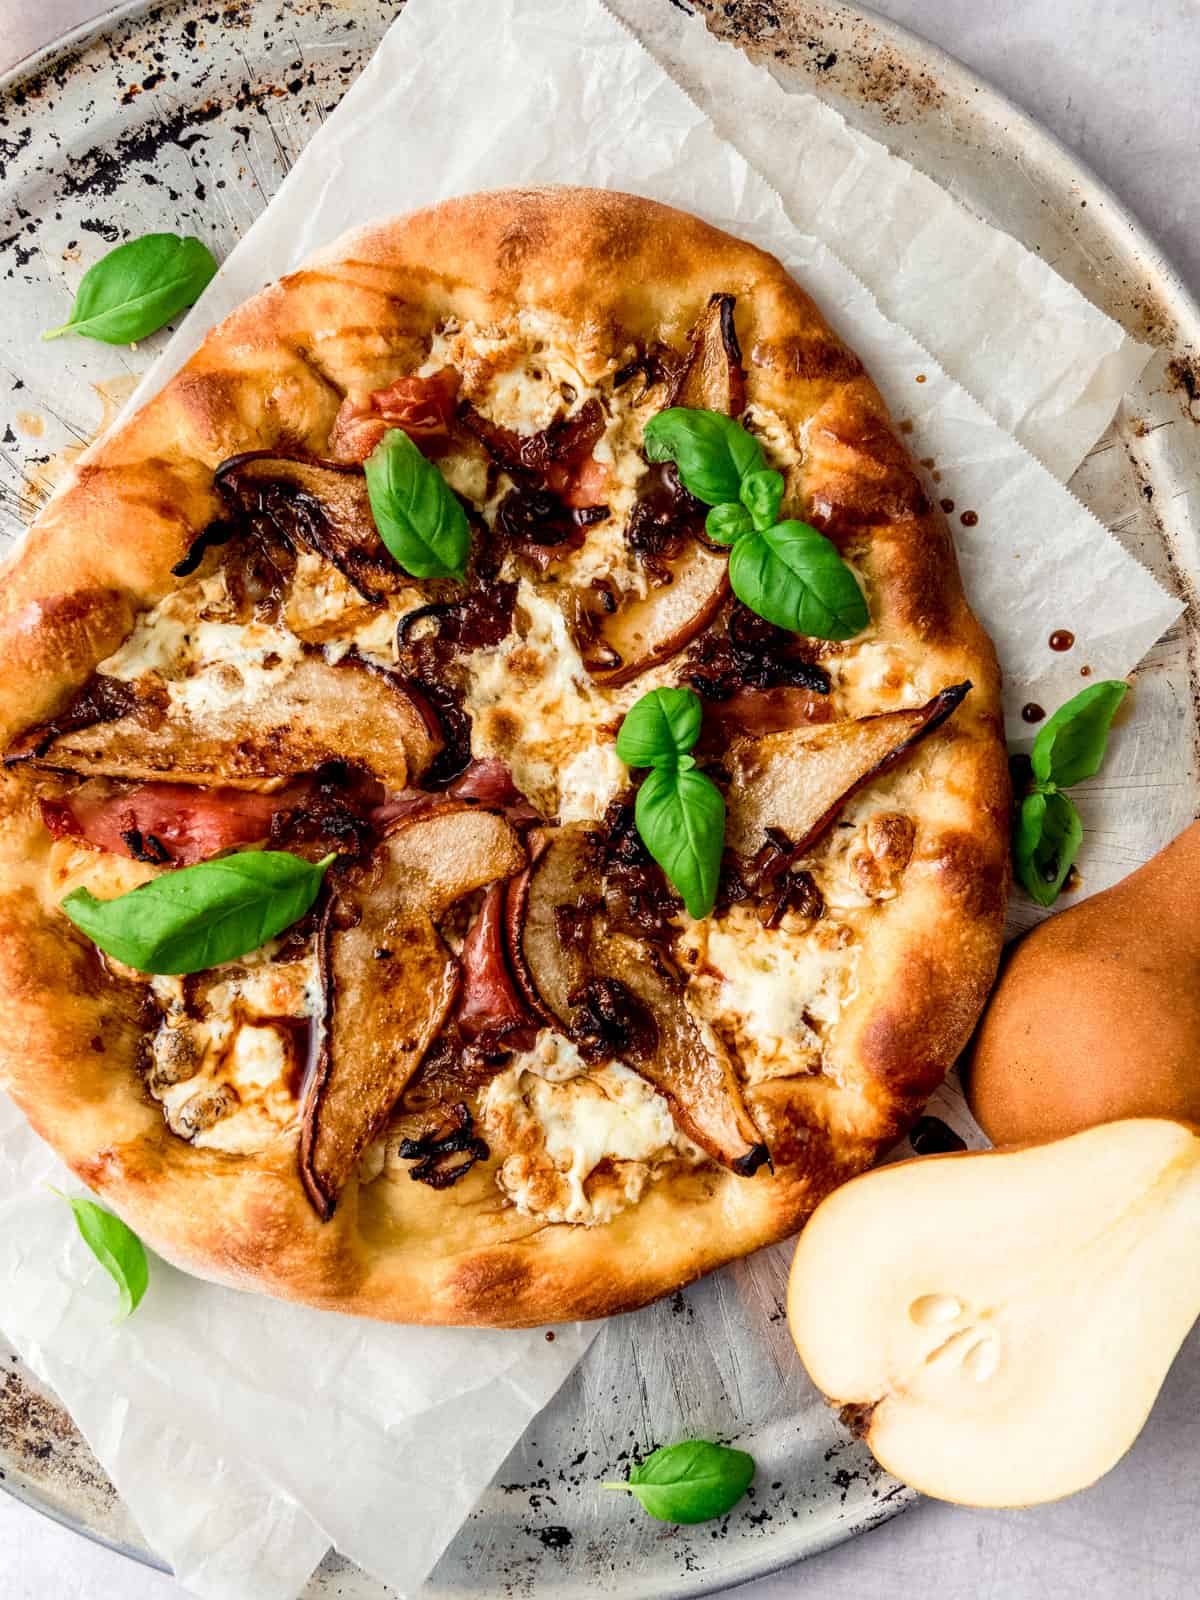 Caramelized pear and prosciutto pizza with mozzarella and drizzled with aged balsamic vinegar.